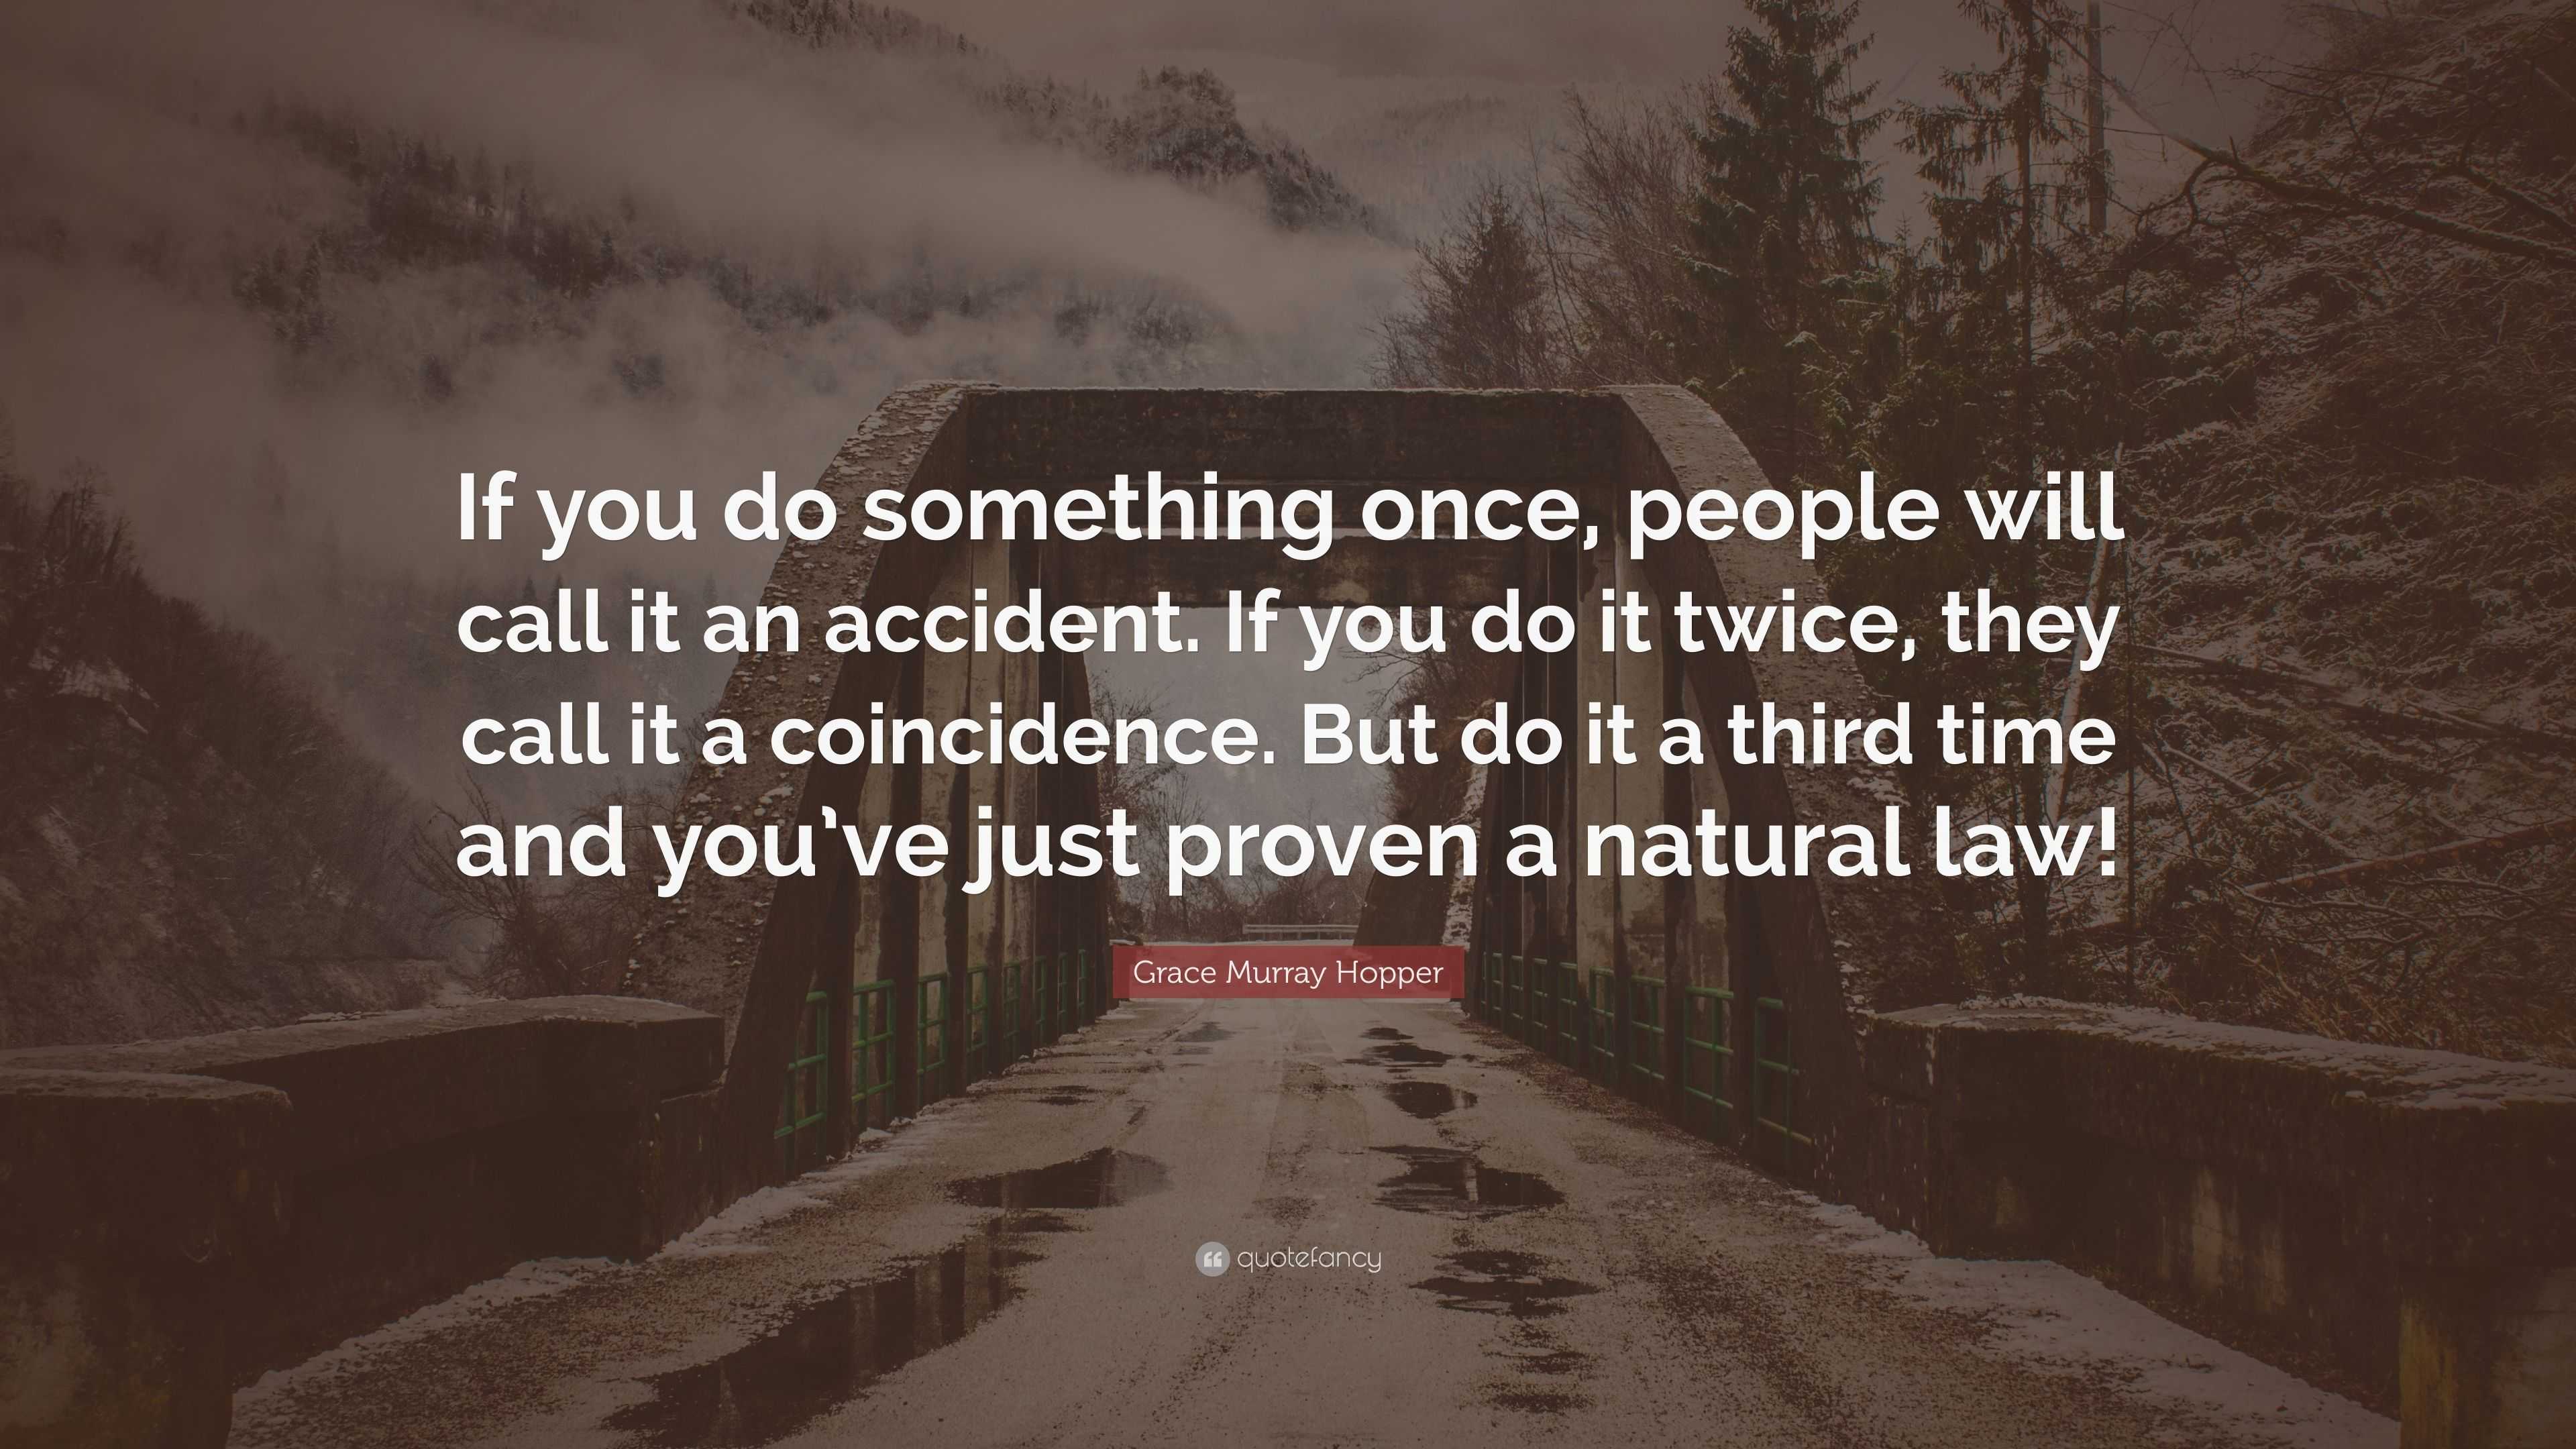 Grace Murray Hopper Quote: “If you do something once, people will call it an accident. If you do it twice, they call it a coincidence. But do it a t...”